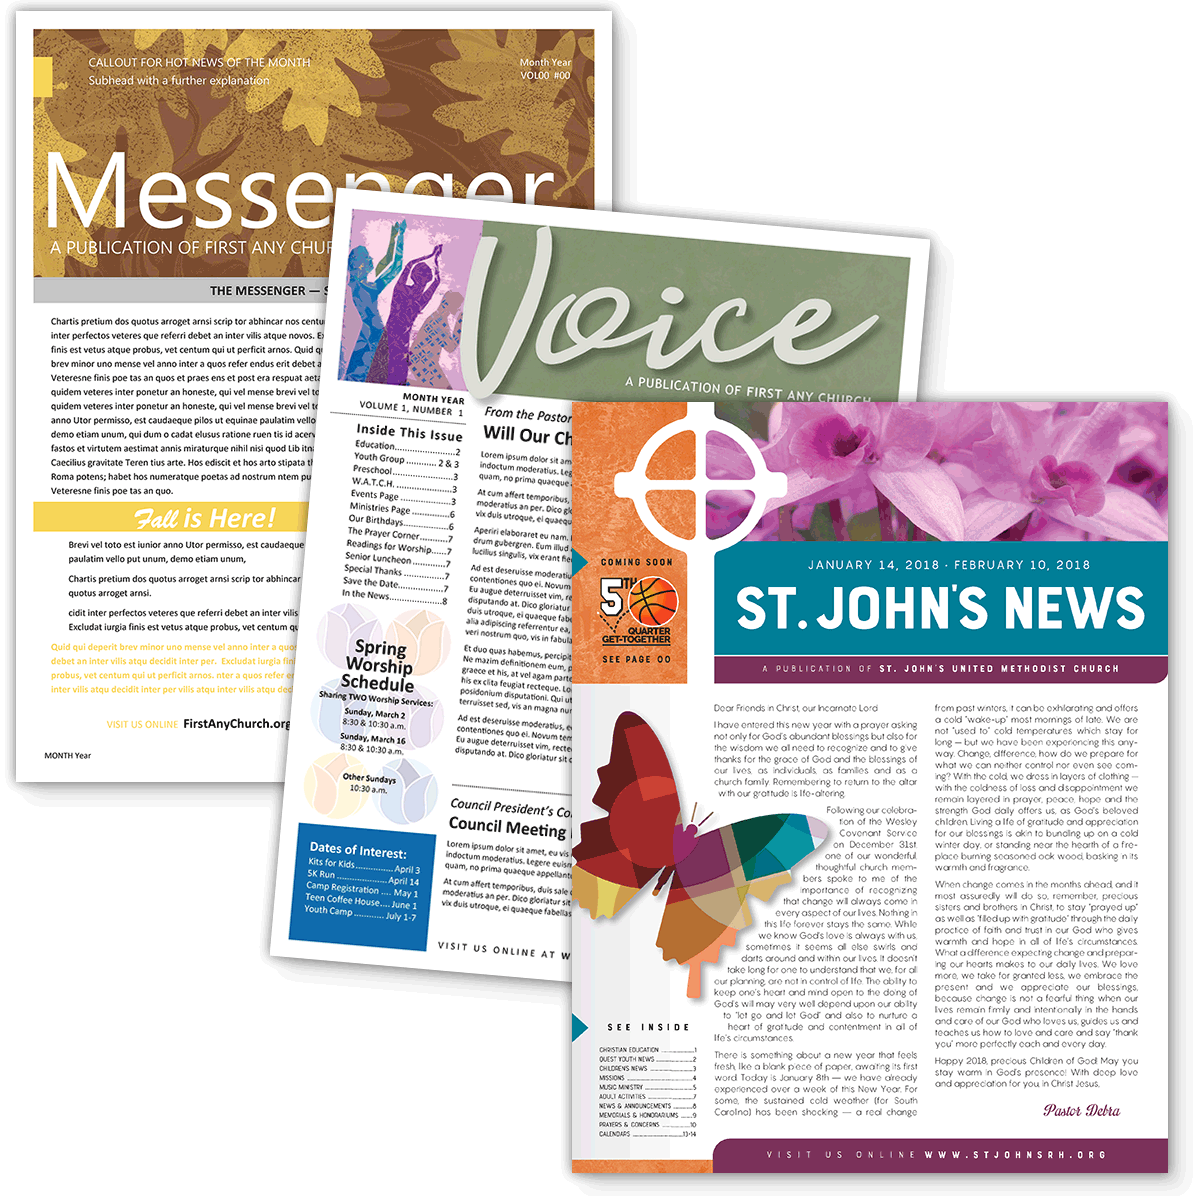 The Newsletter Newsletter Church Newsletter Resource For Art And Content For More Than 40 Years